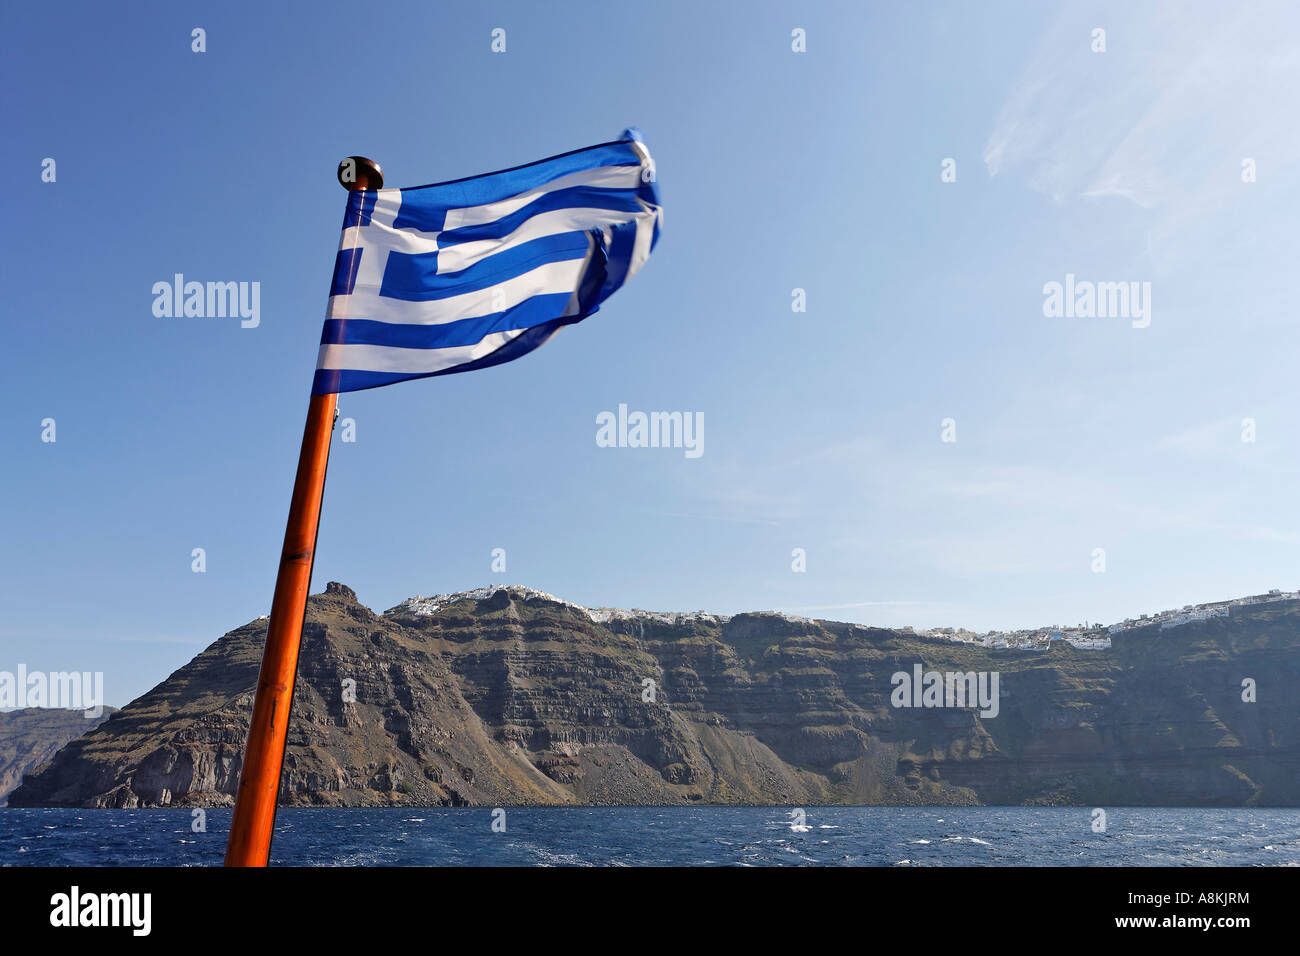 Greek flag and in the background the caldera, Santorini, Greece Stock Photo